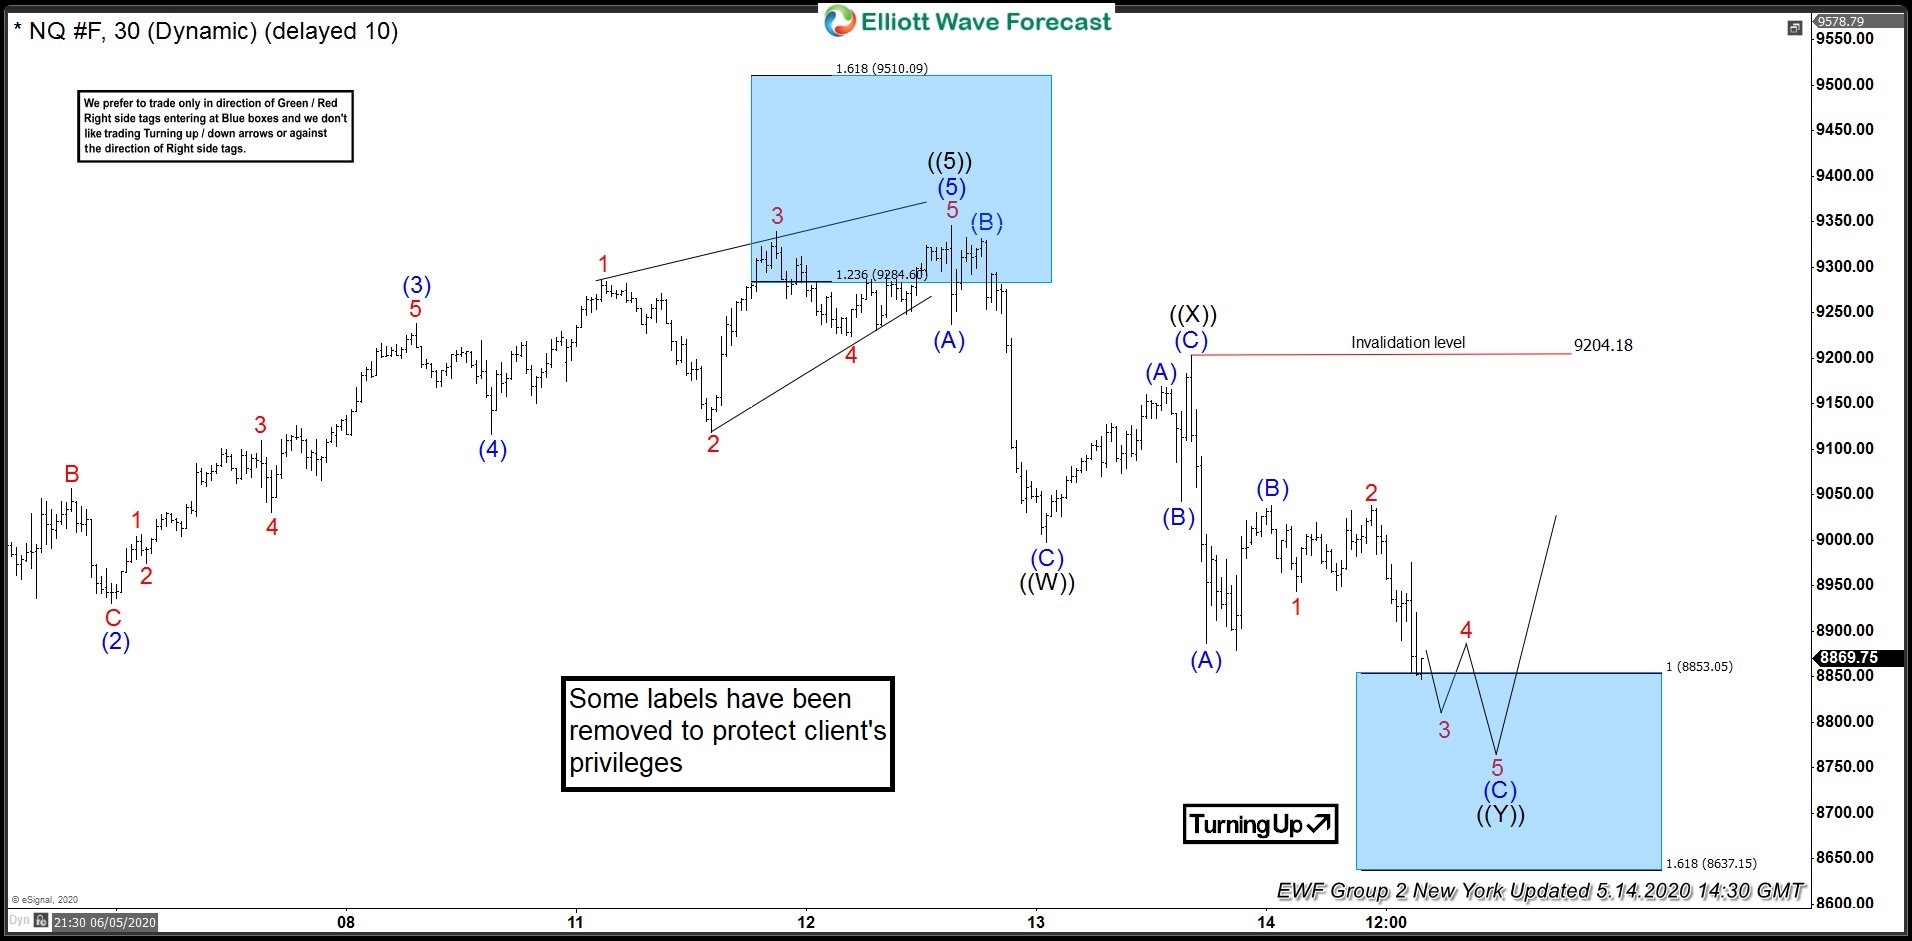 NASDAQ: Reacted Strongly From Elliott Wave Blue Box Area